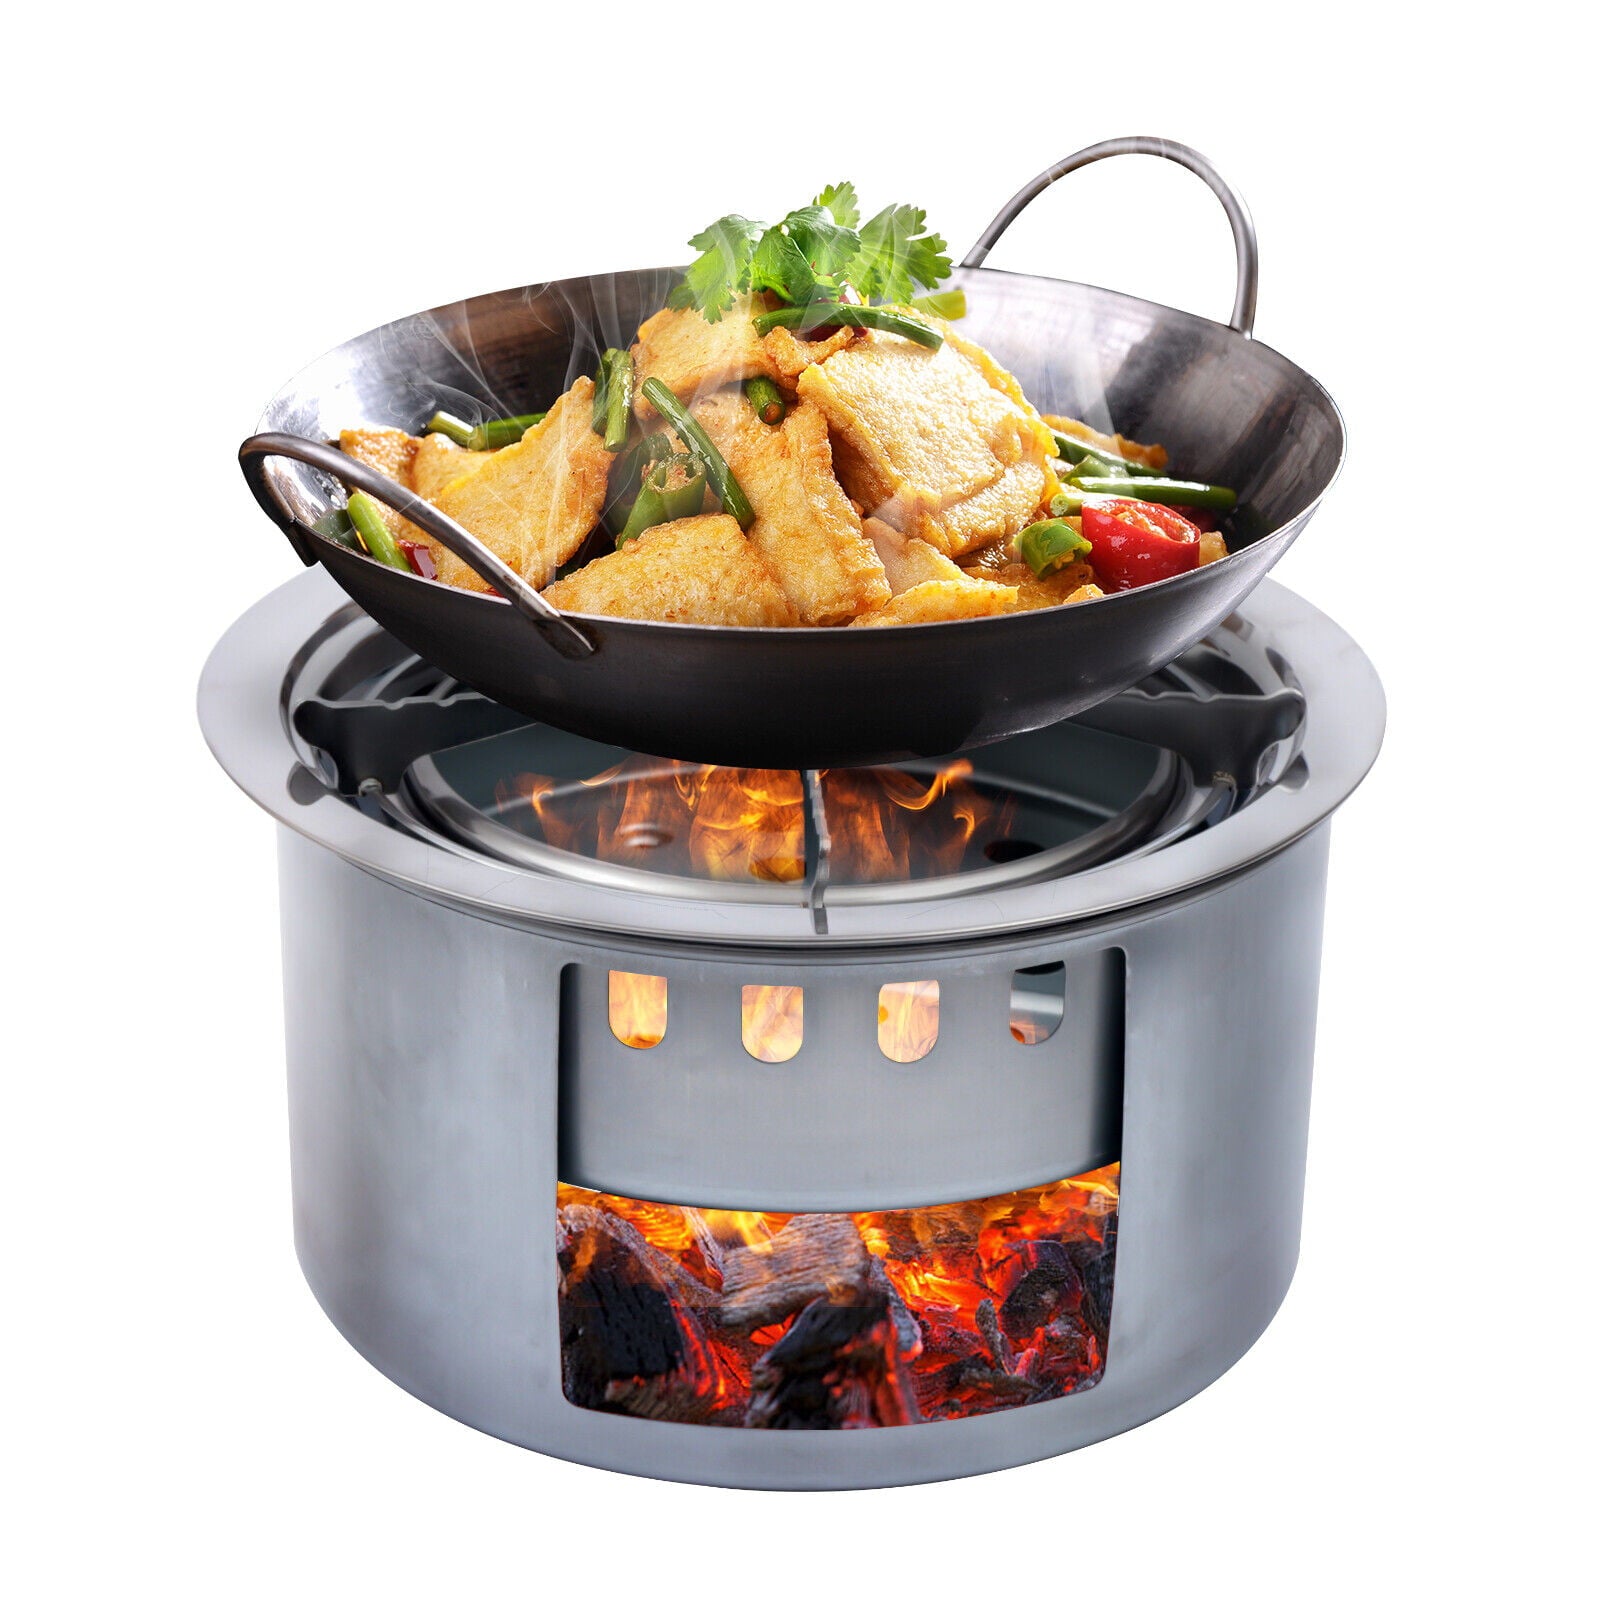 Portable Camping Wood Stove,Wood Stove Cooking with Carrying Bag for Hiking BBQ 4-in-1 Portable Metal Camping Wood Burning Stove BBQ Cooking Outdoor Grill Pan BBQ Grill Wood Burner